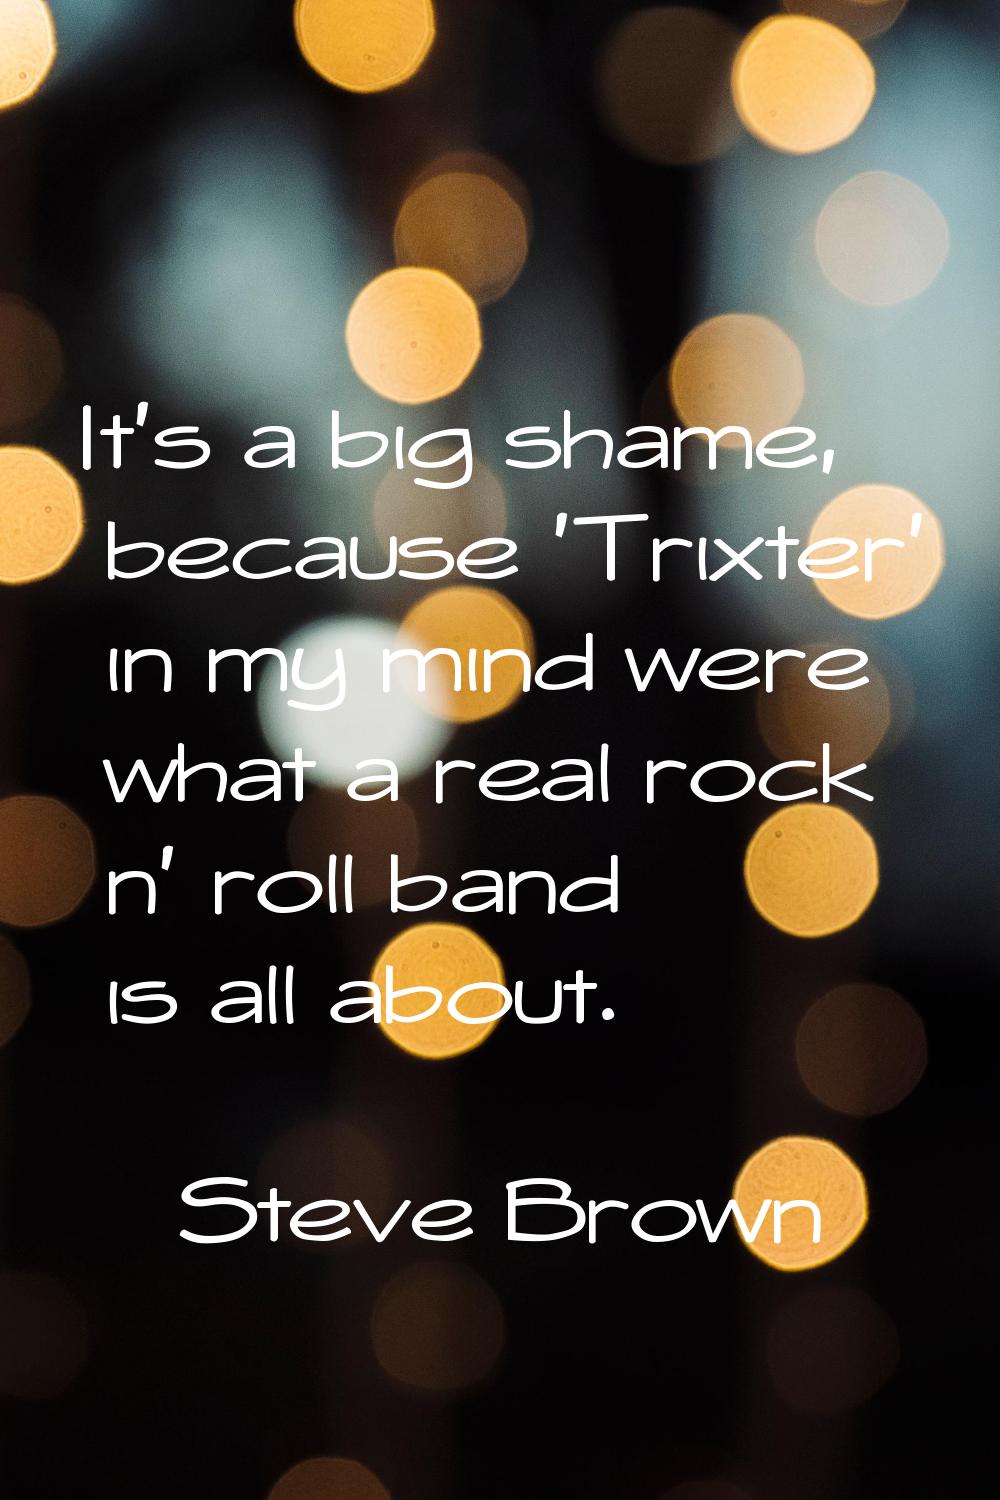 It's a big shame, because 'Trixter' in my mind were what a real rock n' roll band is all about.